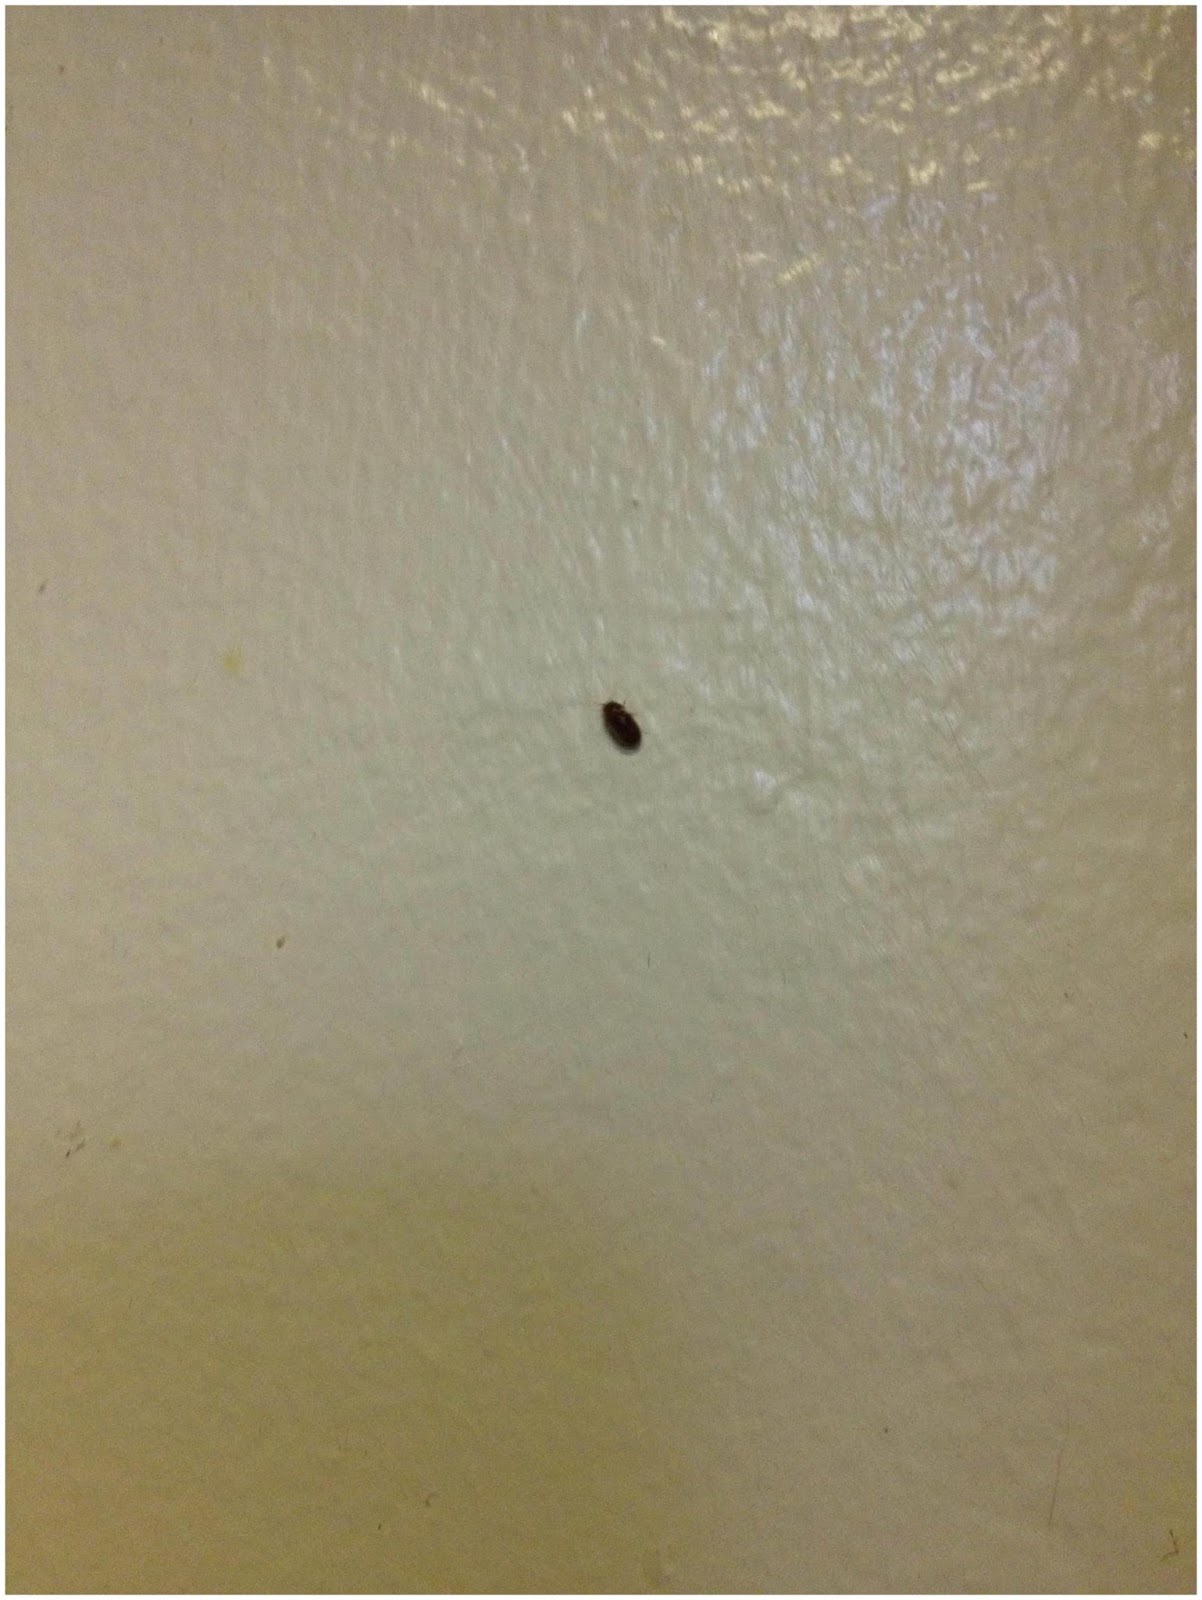 17 Small Crawling Bugs In Kitchen pest control Small,Crawling,Bugs,In,Kitchen